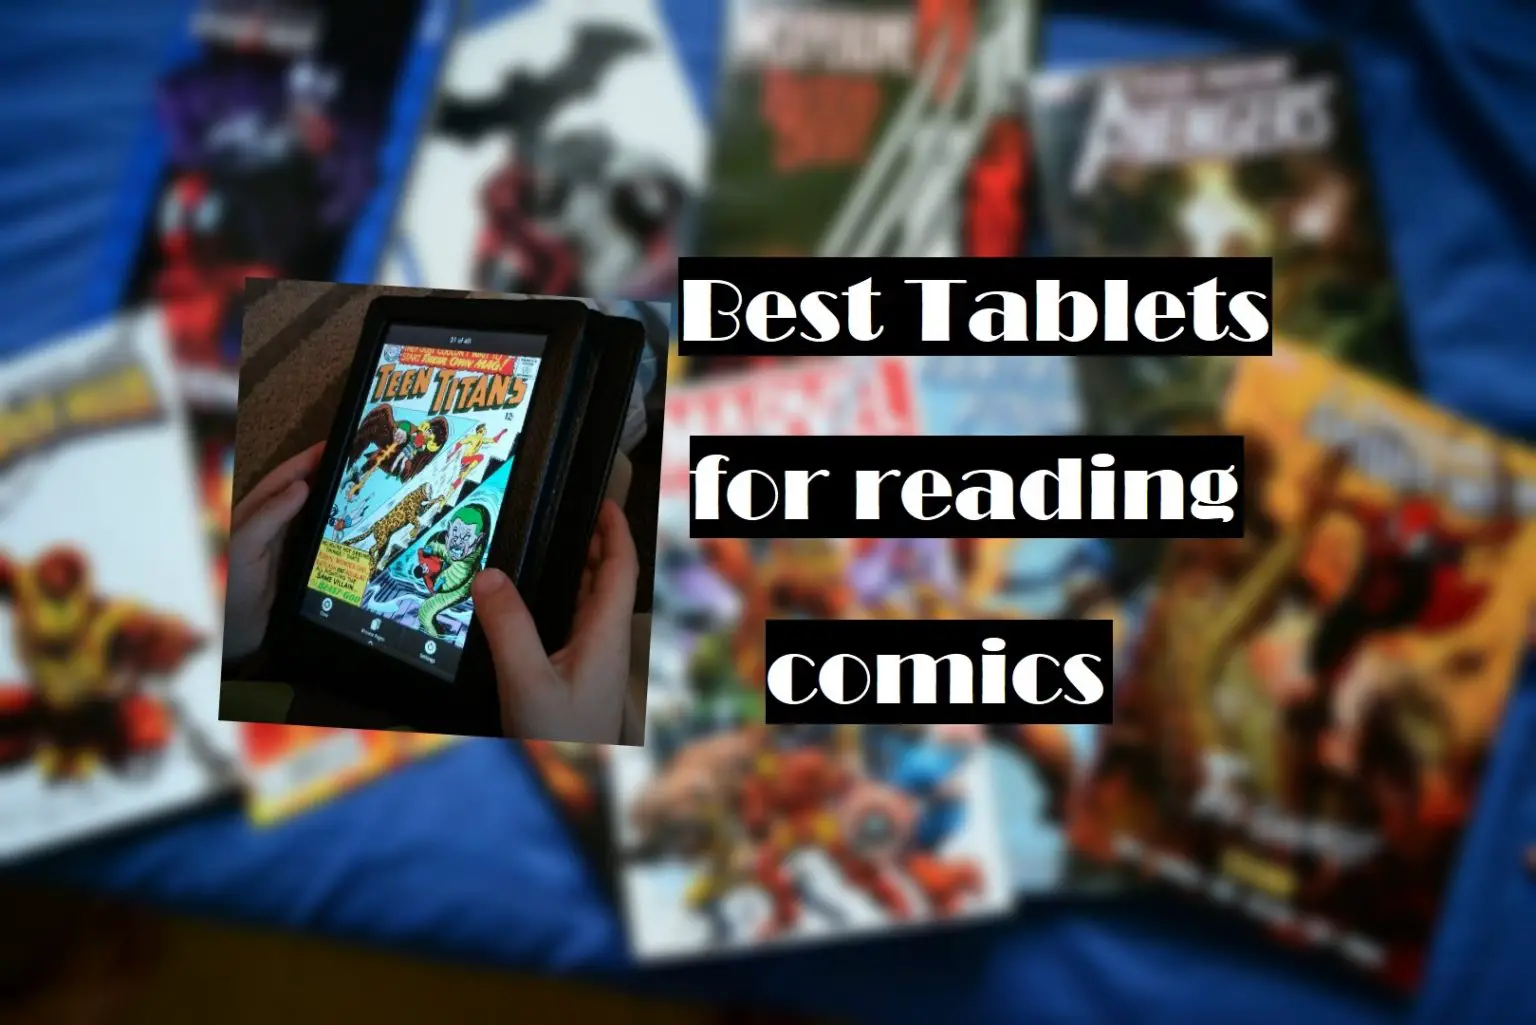 The 11 Best Tablets For Reading Comics [2022]